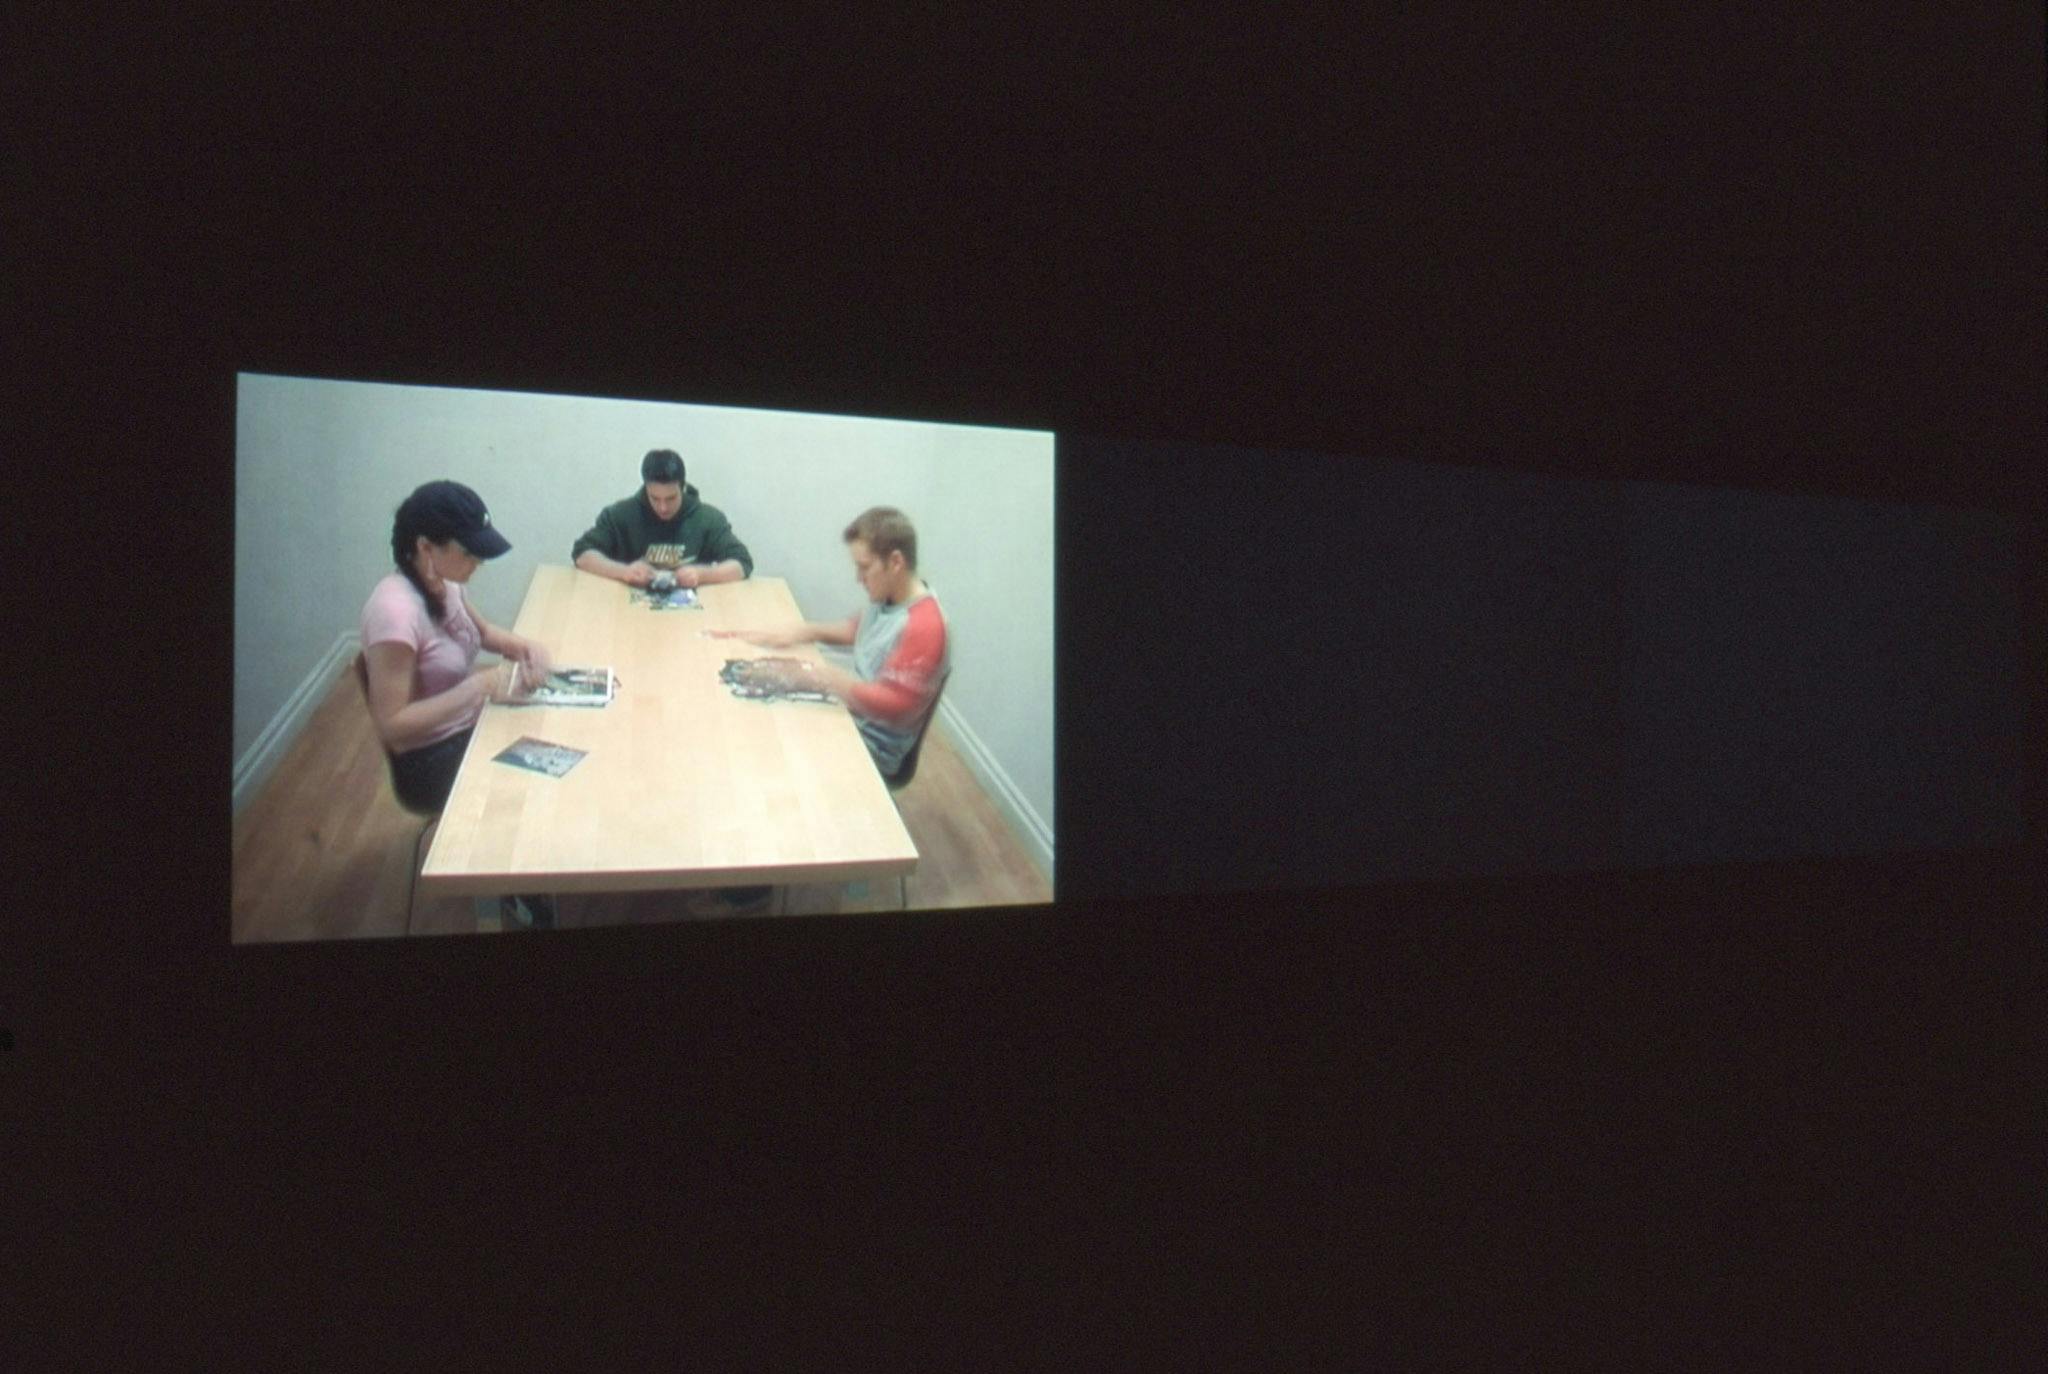 Installation image of video work by Alex Morrison. A video projected on a wall in a completely dark gallery space shows three people at a table working on stacks of magazine-like objects in front of them. 